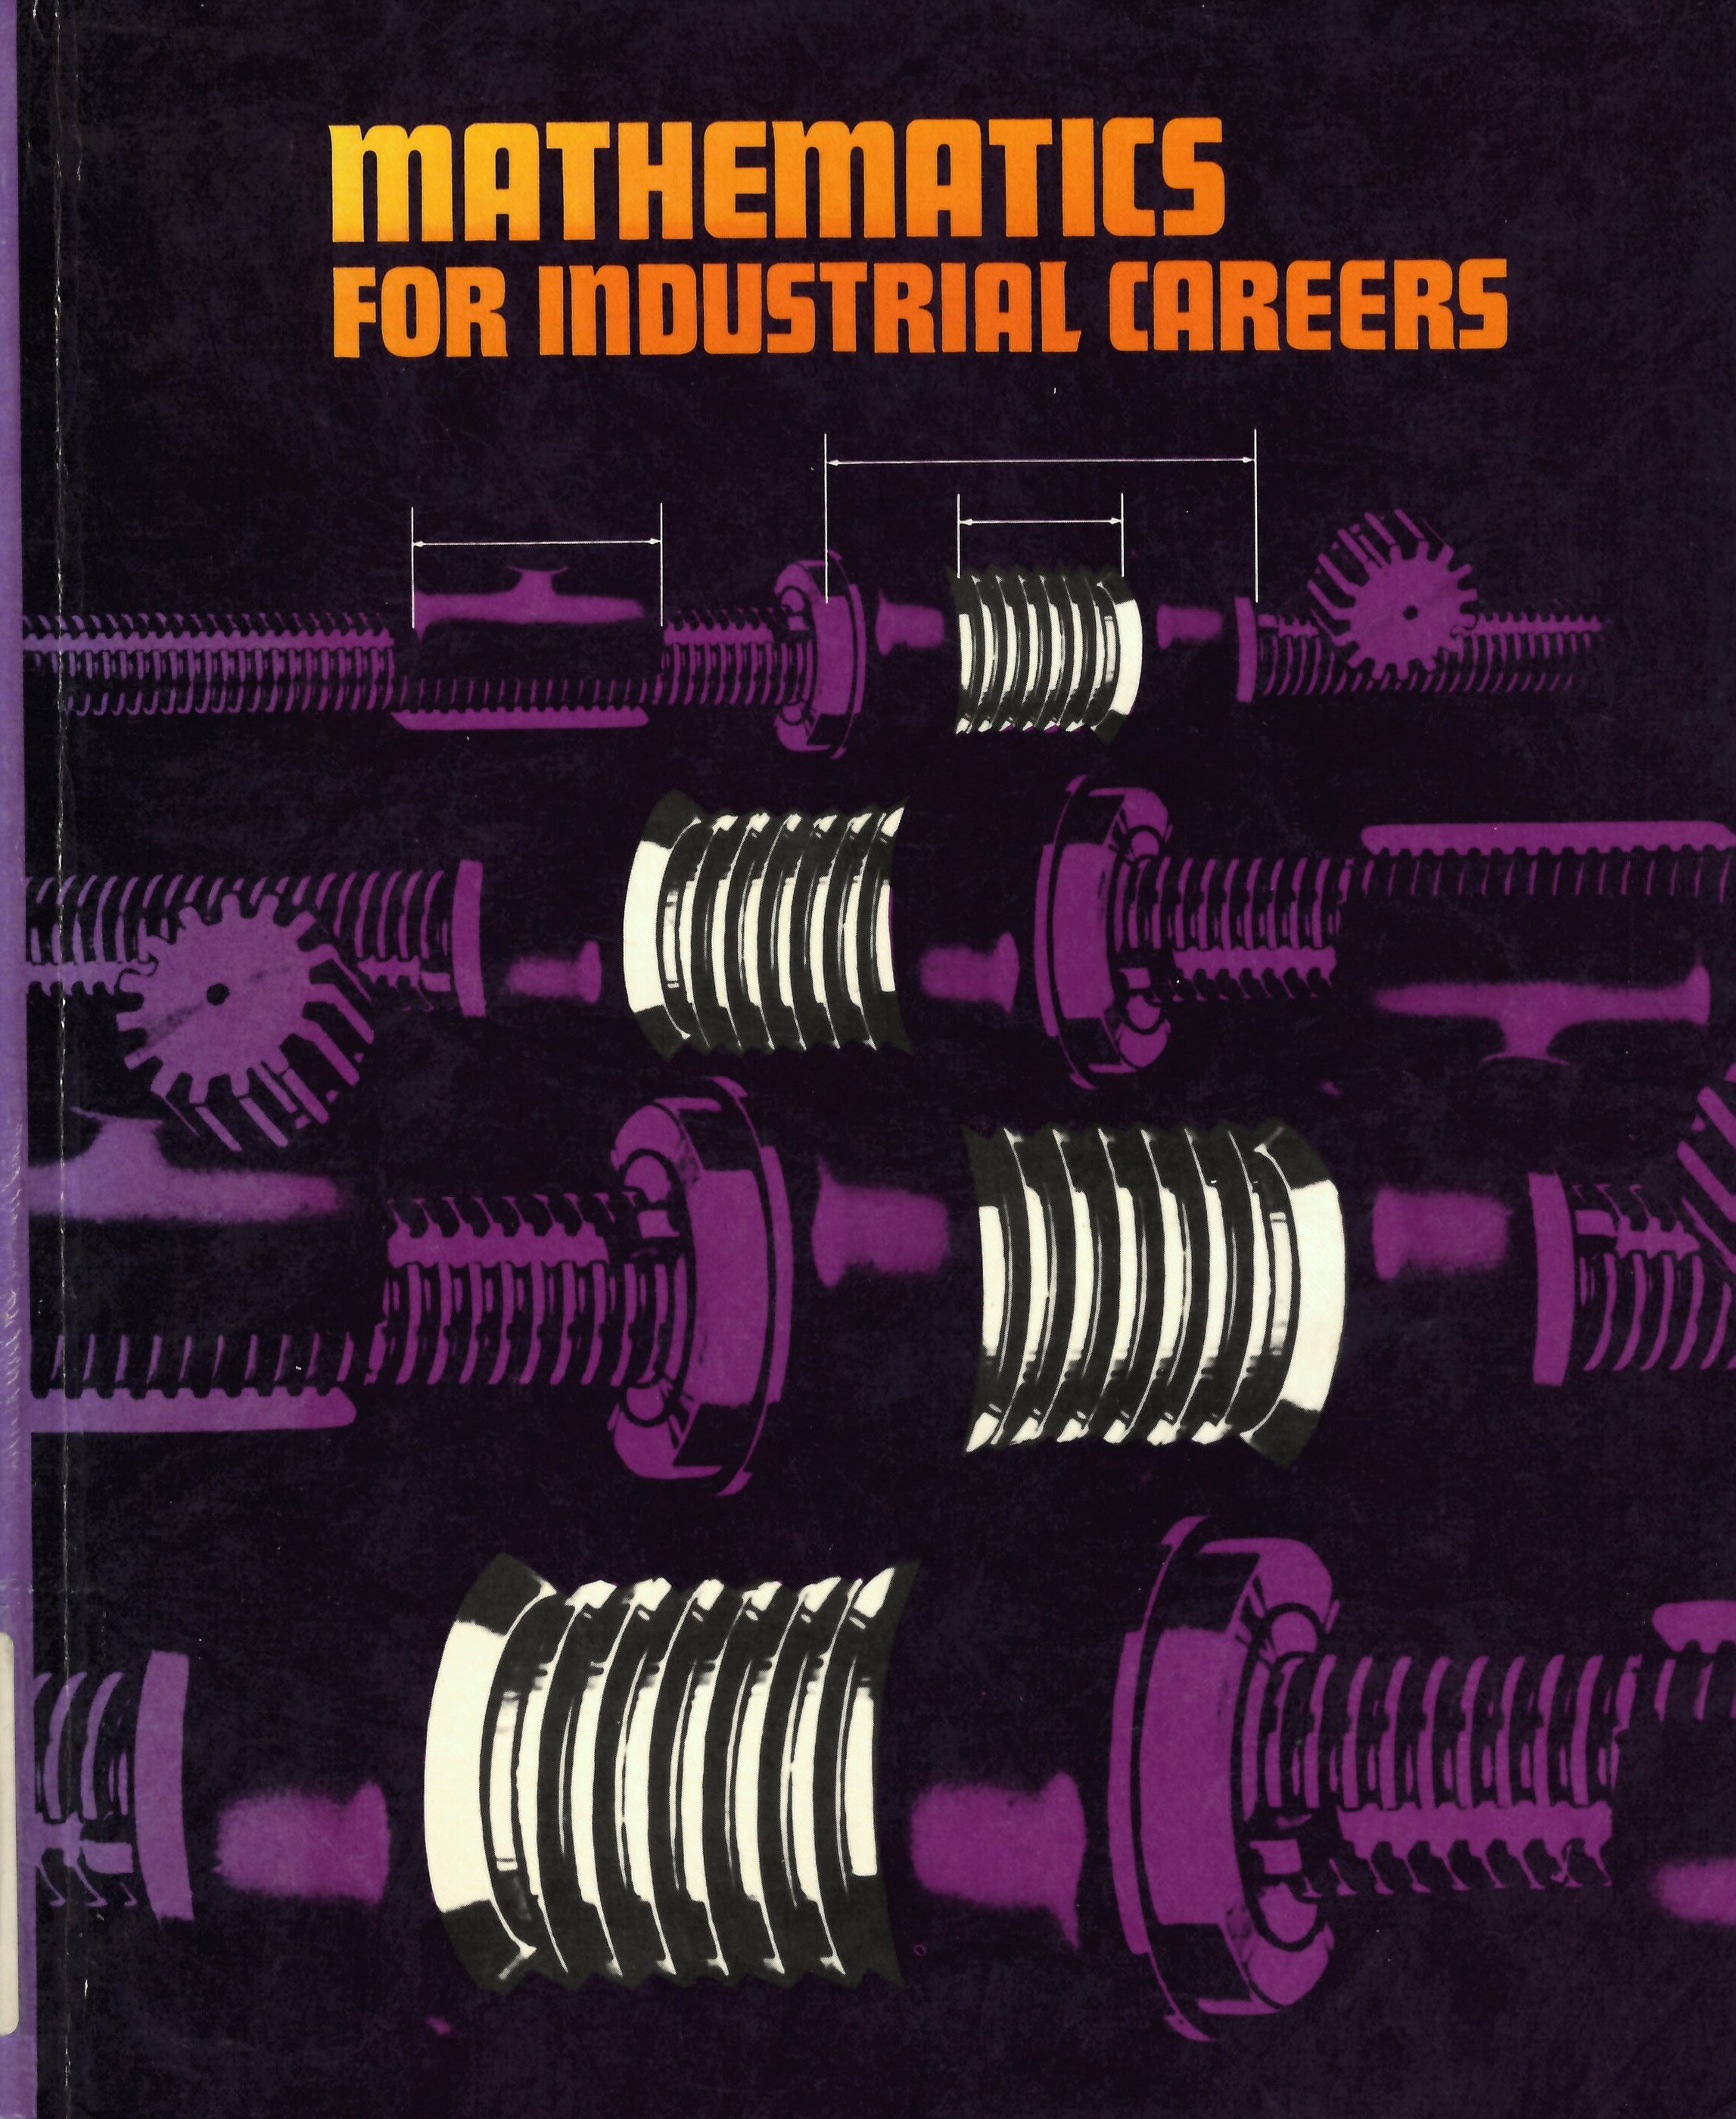 Mathematics for industrial careers